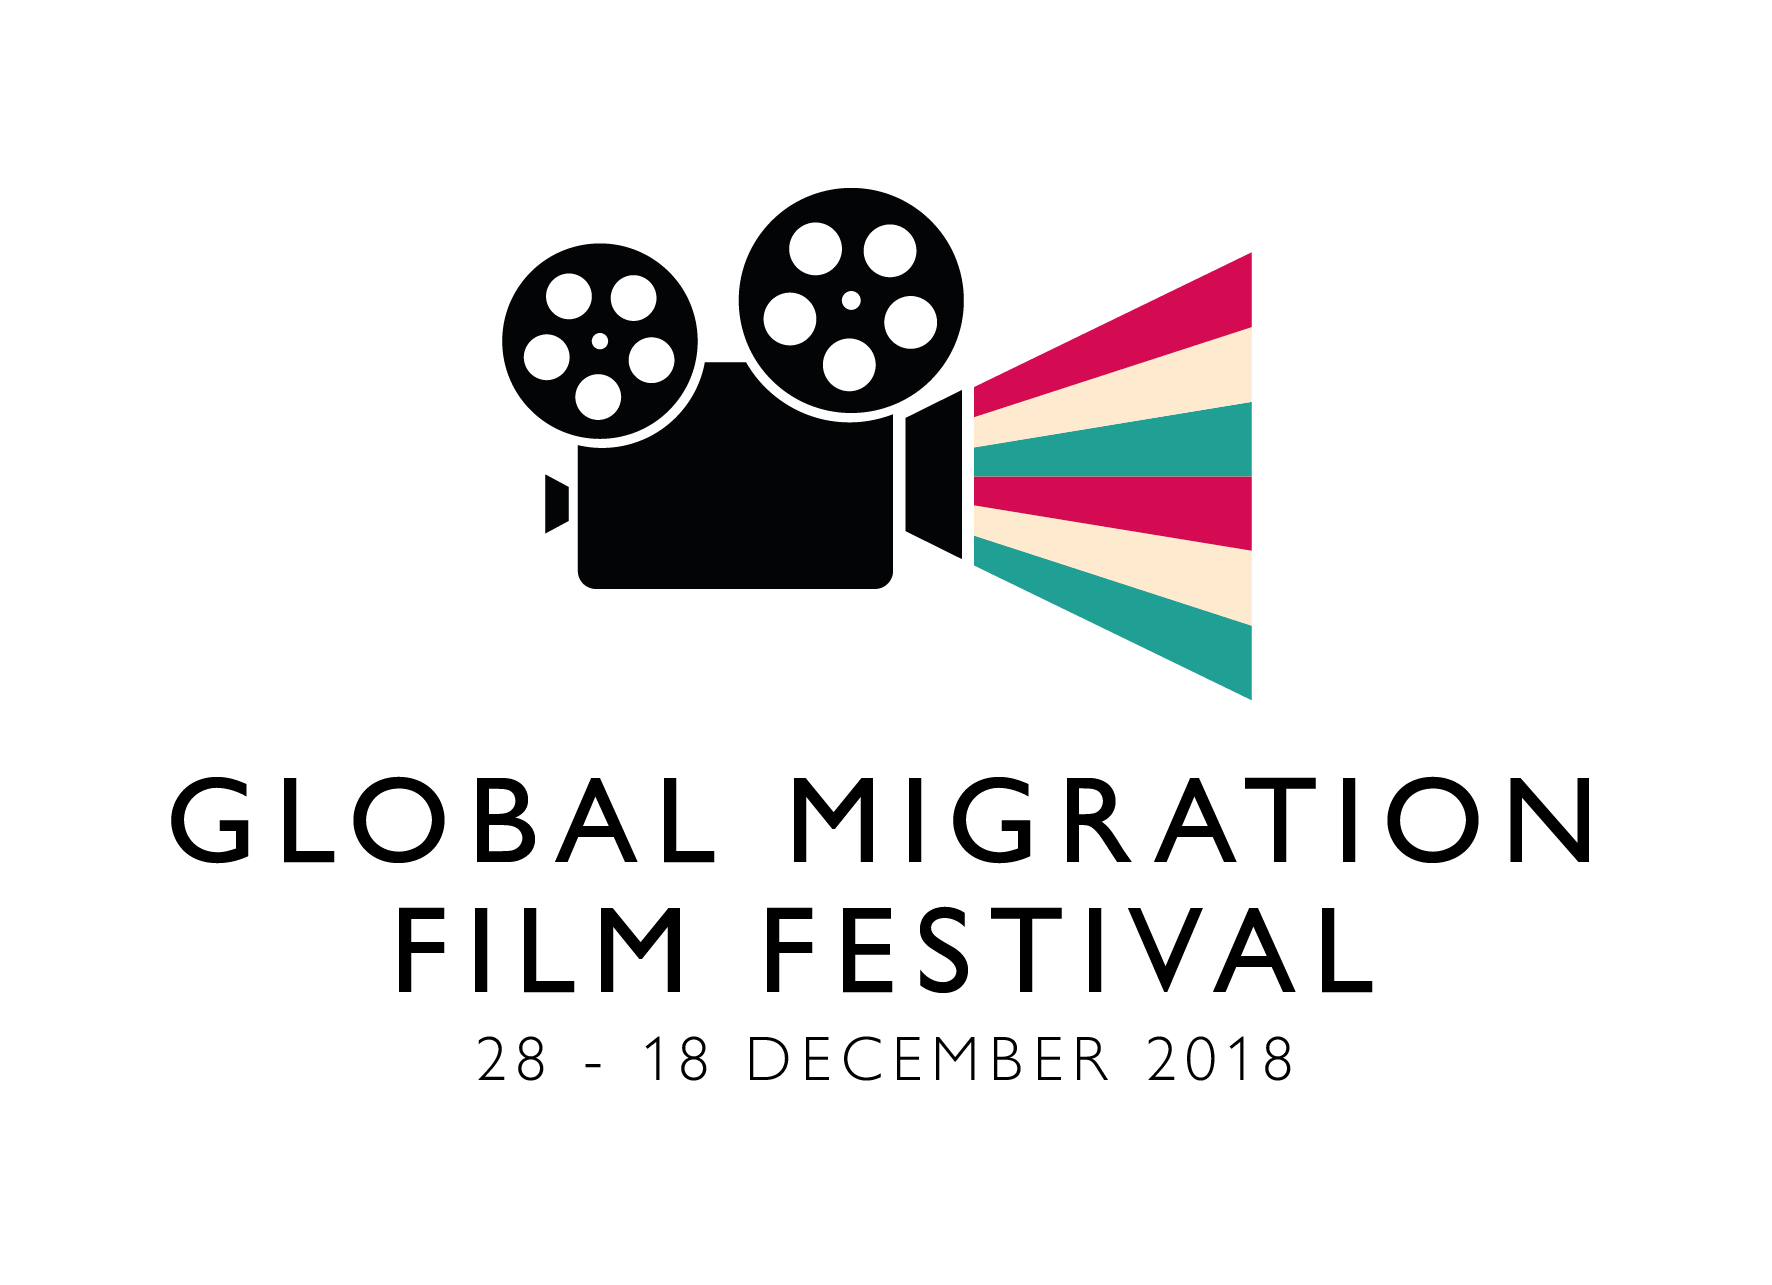 GMFF_LOGO_COLORS (1).PNG